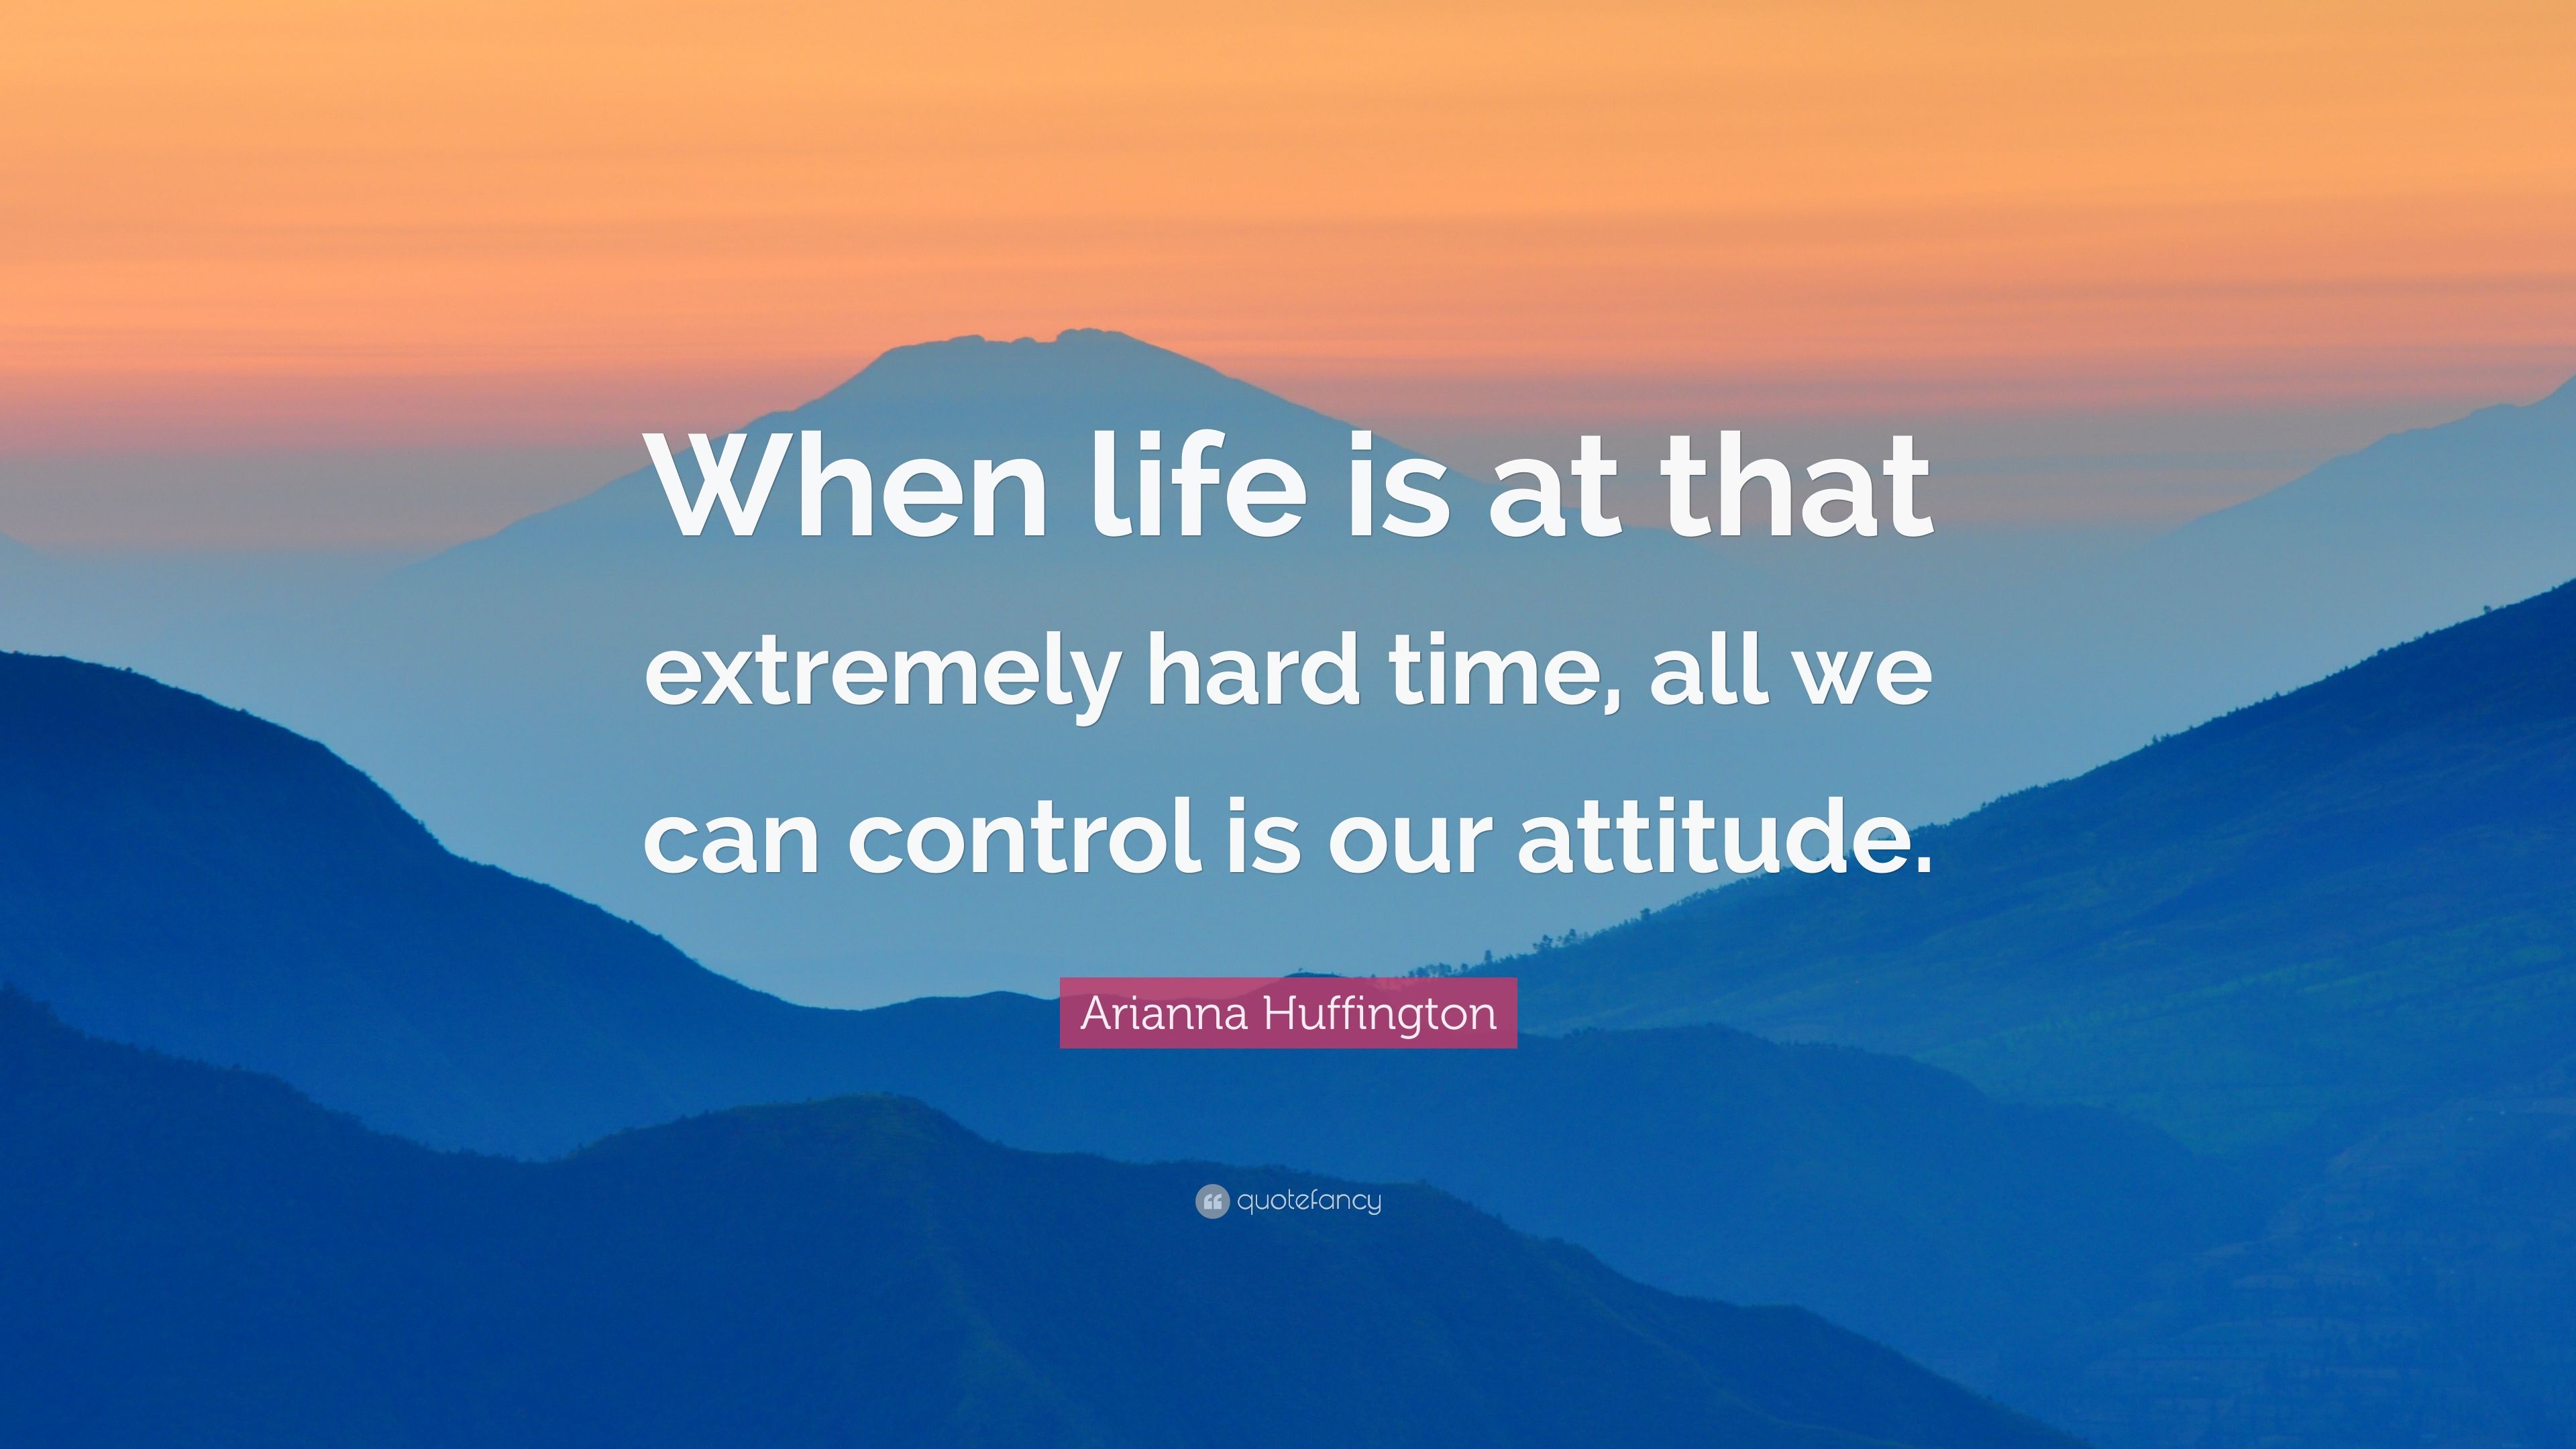 Arianna Huffington Quote: “When life is at that extremely hard time, all we can control is our attitude.” (7 wallpaper)